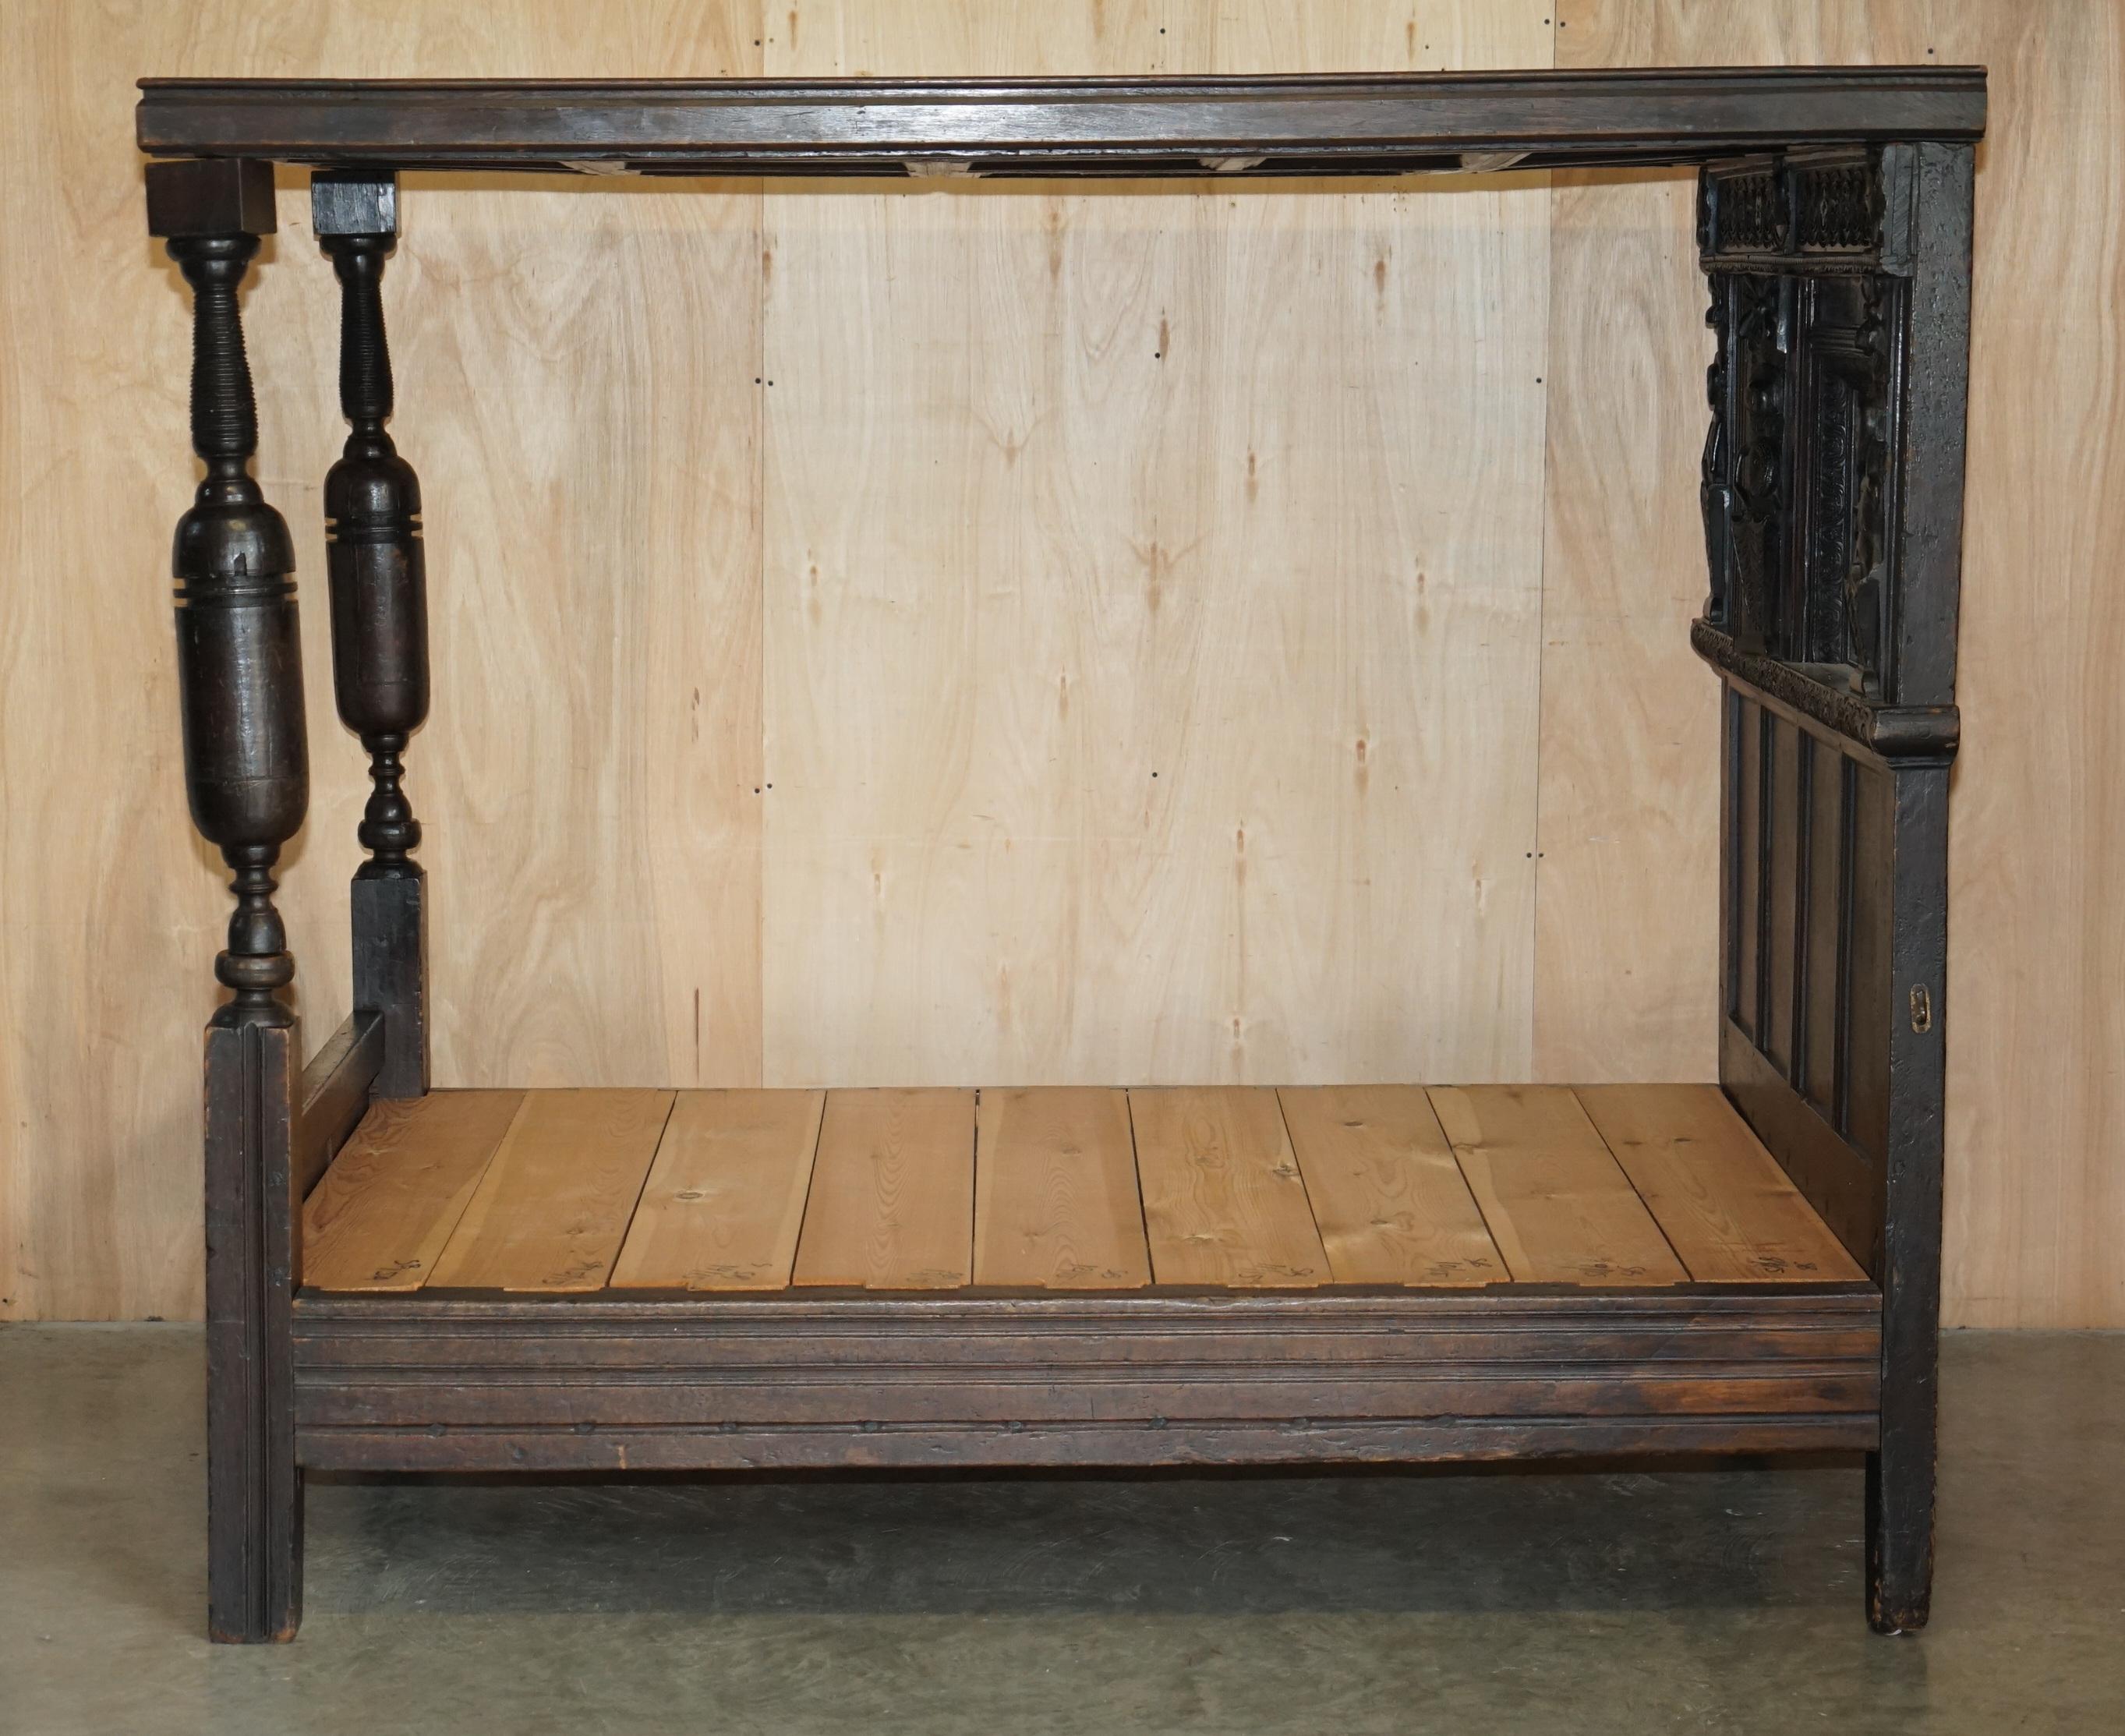 17TH CENTURY JACOBEAN WILLIAM III CIRCA 1650 ENGLiSH OAK TESTER FOUR POSTER BED For Sale 13